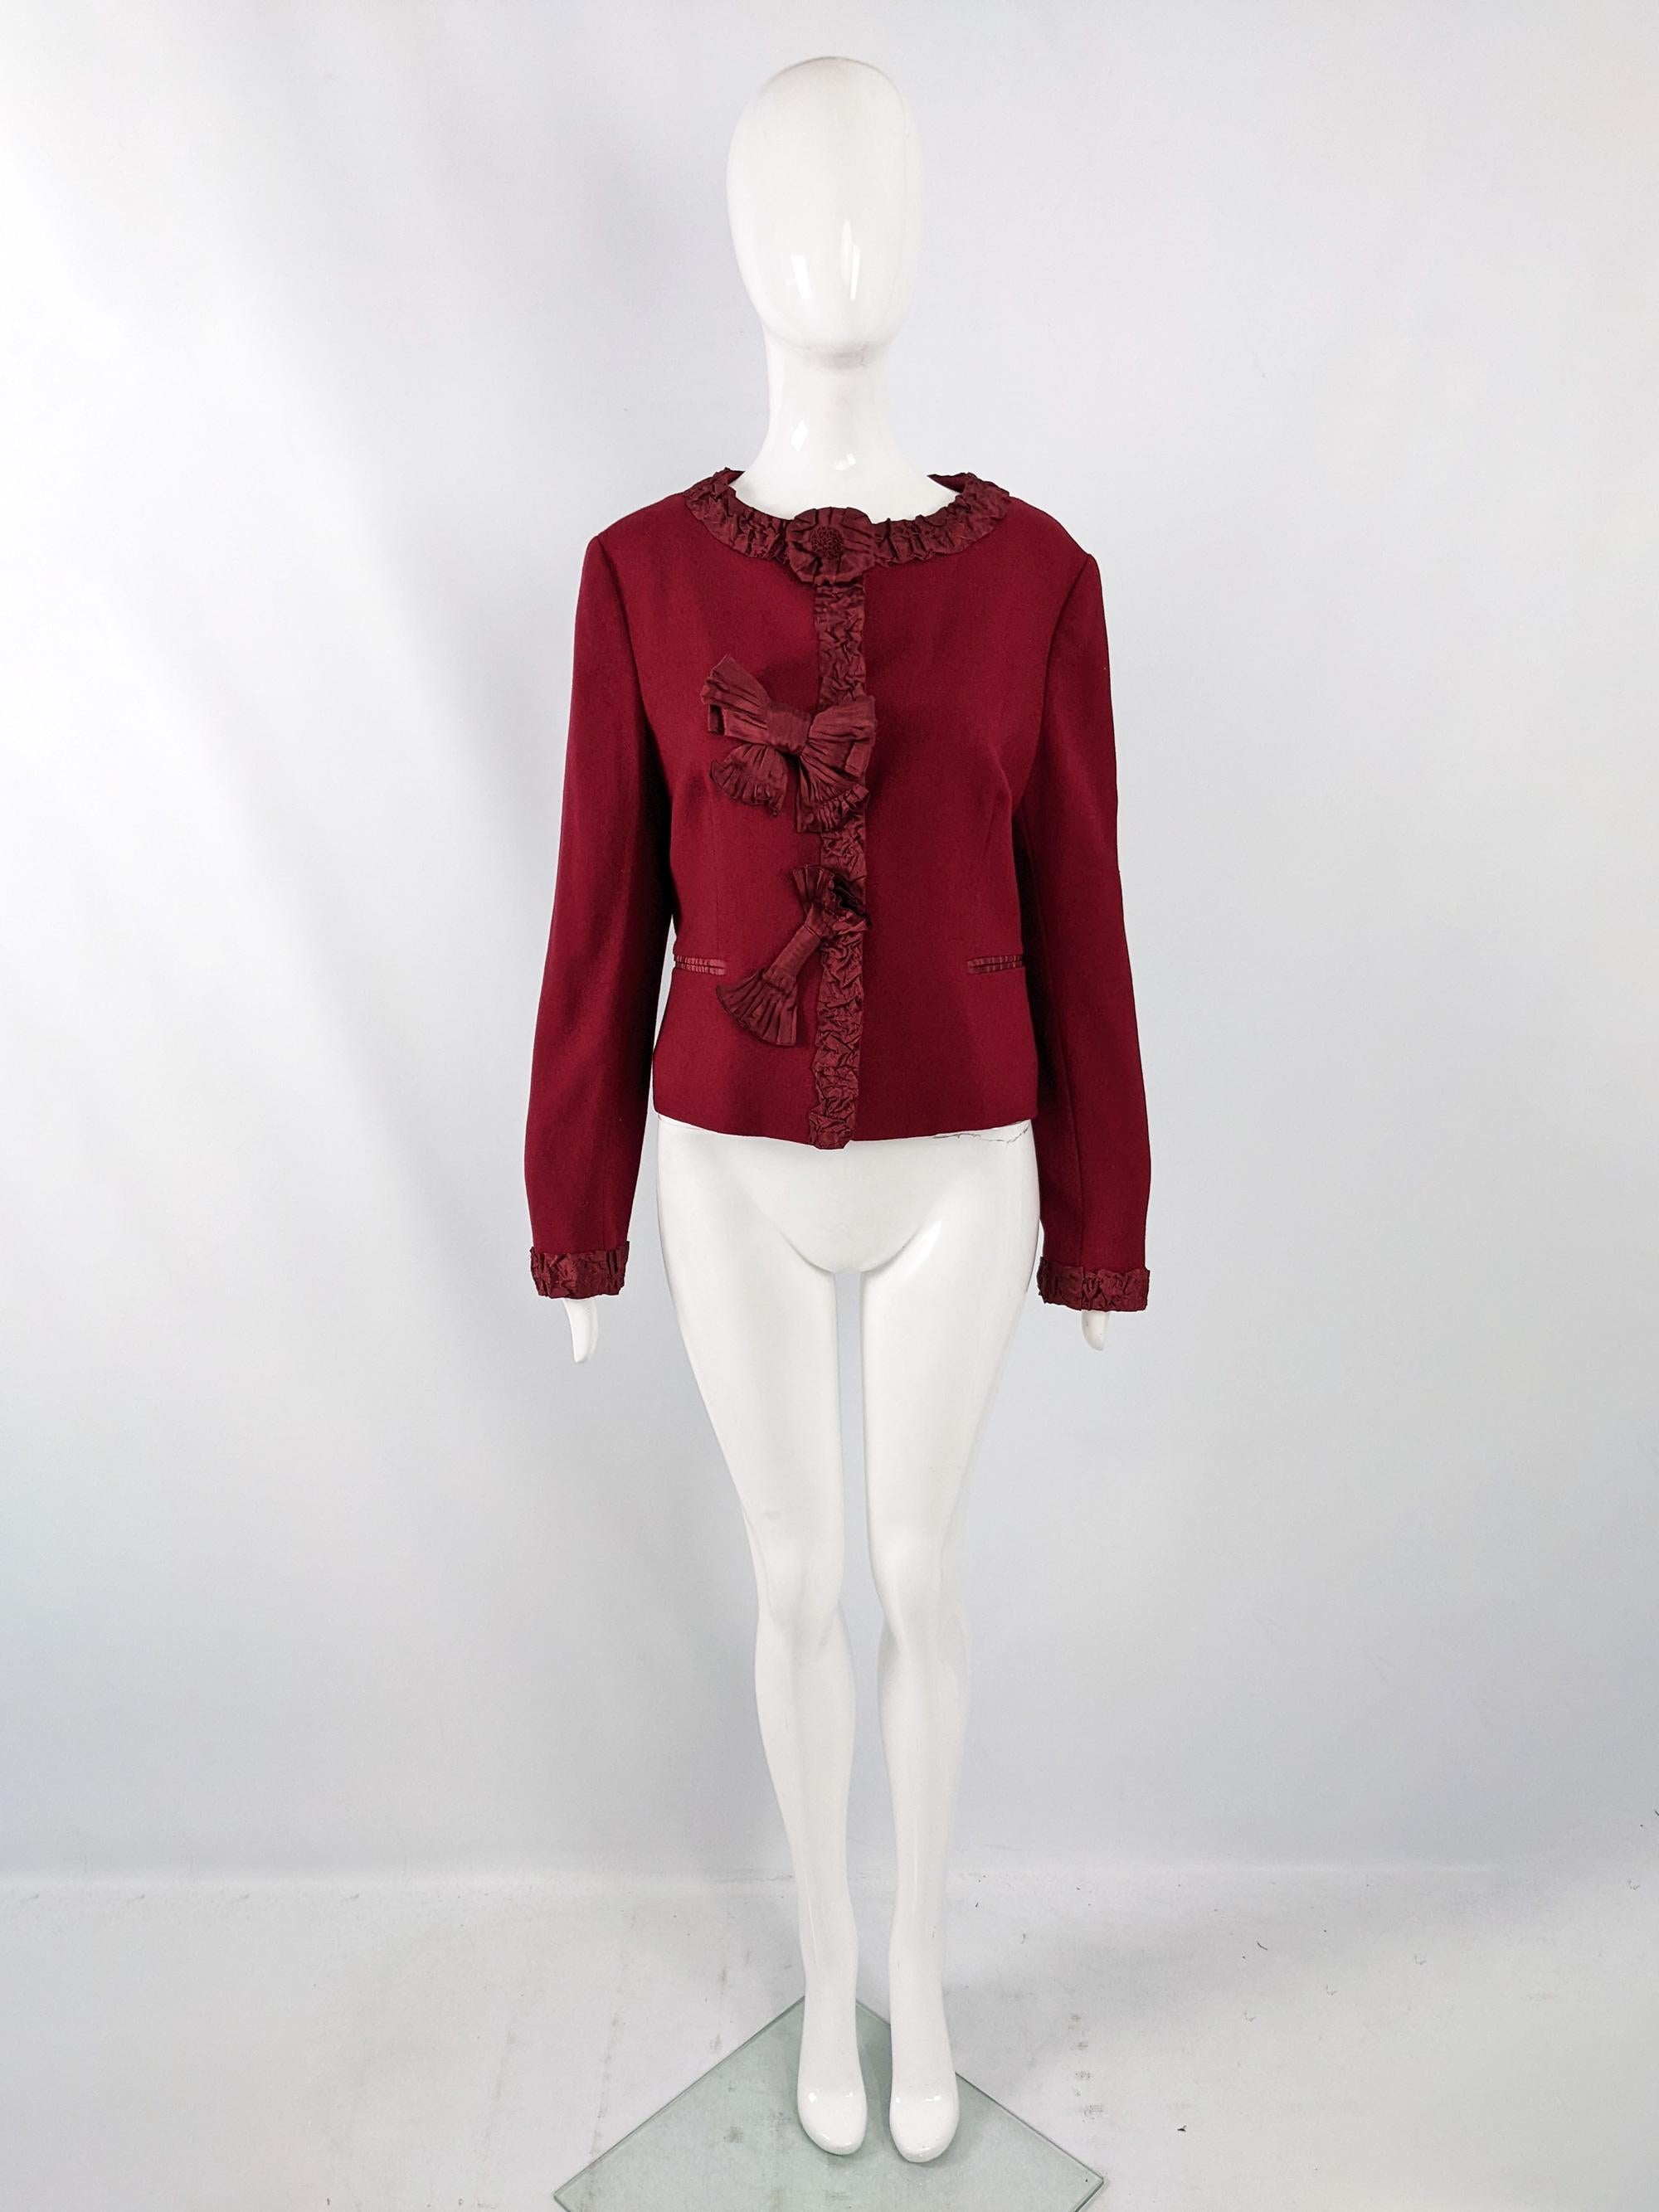 A chic vintage womens Moschino jacket from the late 90s / early 2000s. Made in Italy from a wine red virgin wool crepe fabric with amazing ruched ribbon and bow details to the front, adding a touch of whimsy.

Size: Marked vintage IT 46 but measures